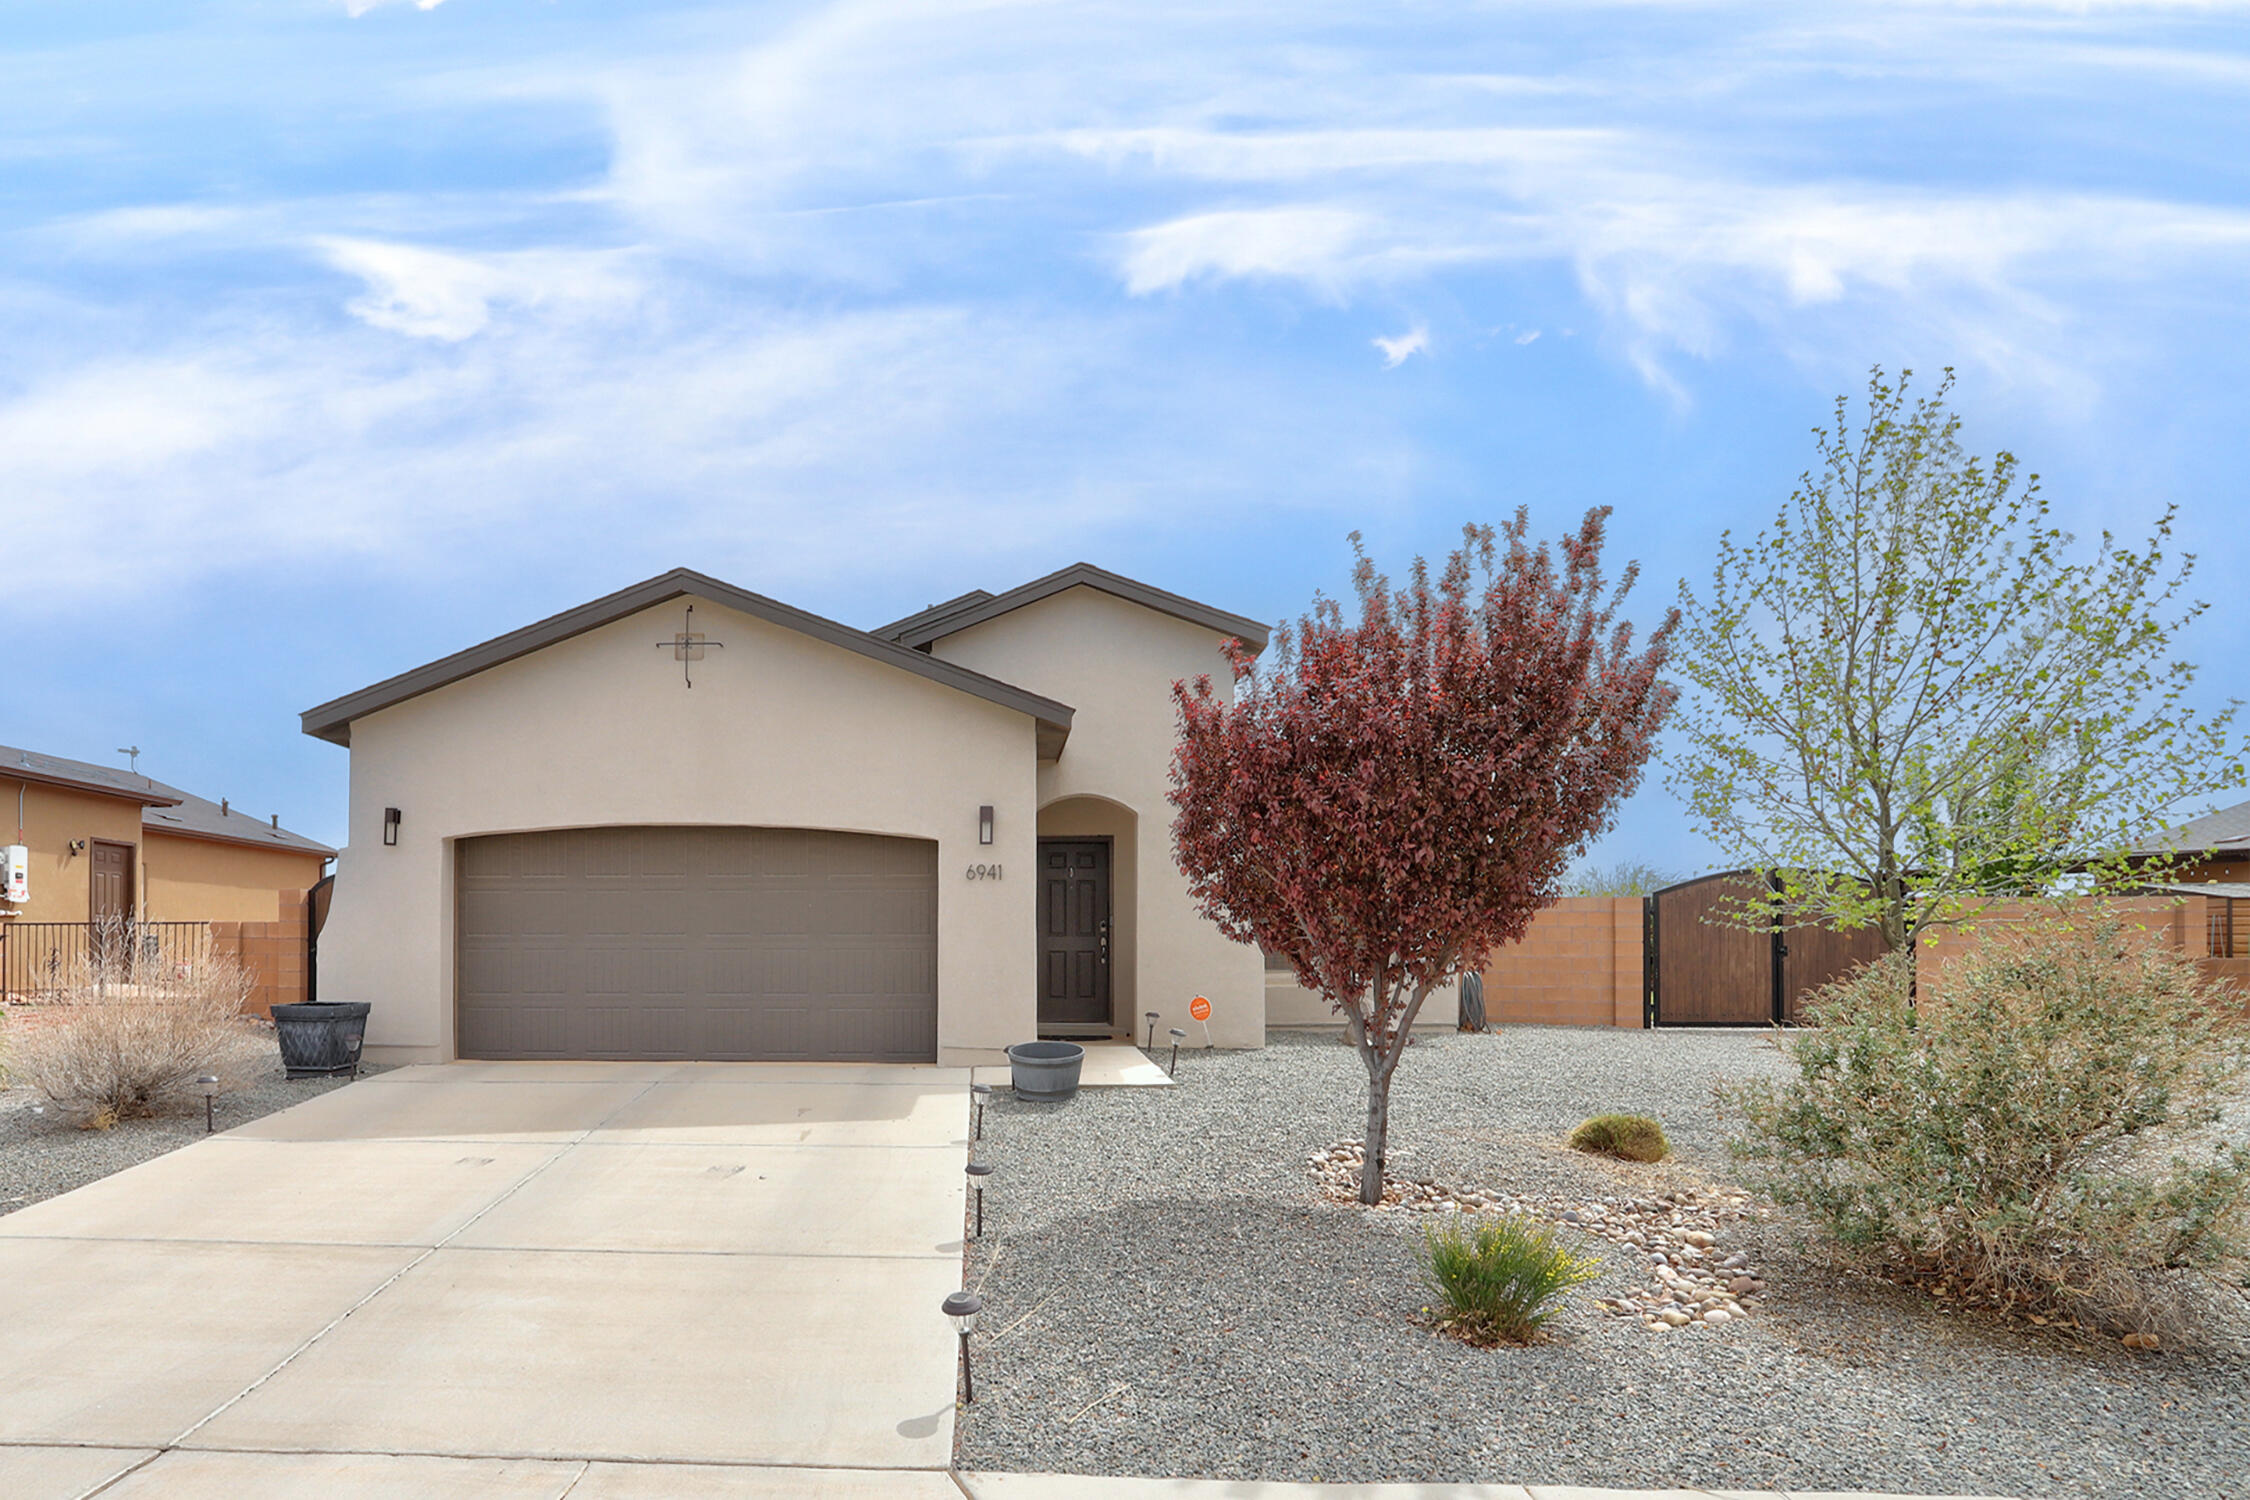 Discover this stunning single-story home built by Abrazo in 2018, located in the peaceful Mountain Hawk neighborhood of Rio Rancho. This modern 3-bedroom, 2-full bathrooms smart home is move-in ready with a walking closet in primary bedroom and a soak tub for added relaxation. Enjoy a spacious floor plan ideal for entertaining, a modern kitchen equipped w/gas stove, with a skylight and stainless appliances, and a fully insulated garage. The landscaped backyard features fruit trees, an irrigation system, and a raised privacy wall perfect for relaxation and entertaining. Side yard access accommodates your RV, boat, etc. No HOA/PID fees and easy access to Albuquerque and Santa Fe via HWY 550/I-25.